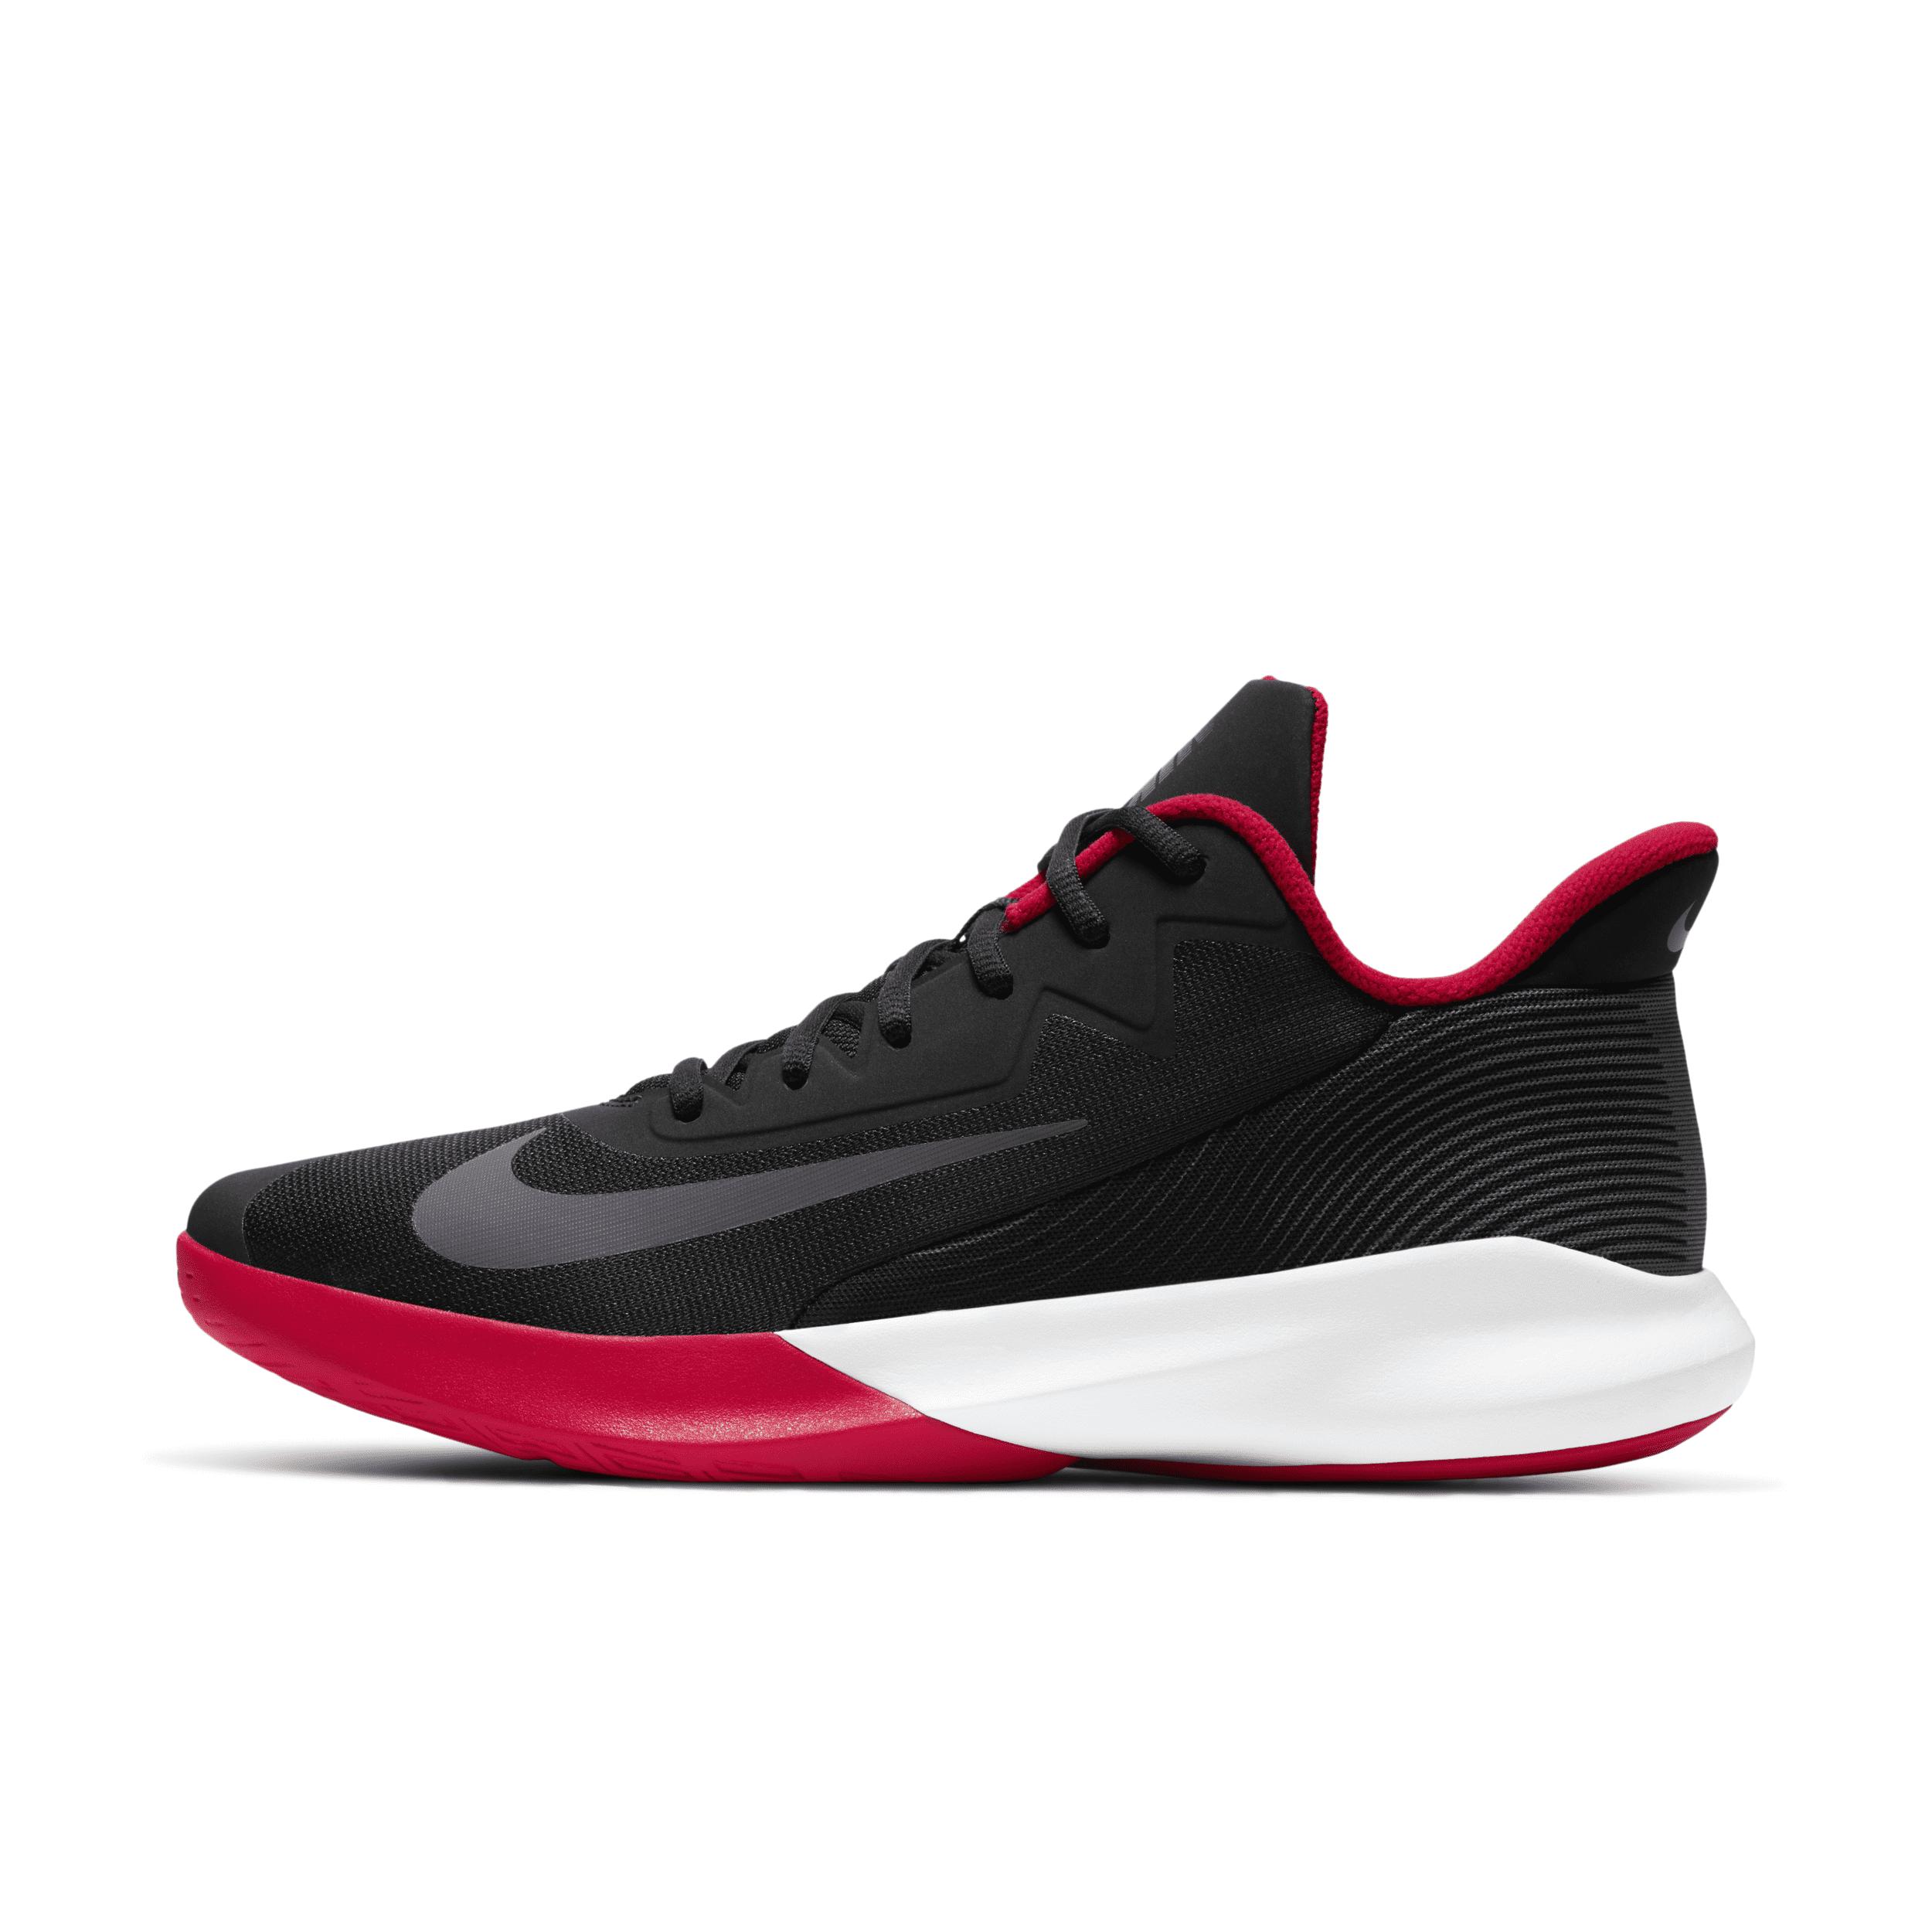 Nike Unisex Precision 4 Basketball Shoes In Black, in Red | Lyst